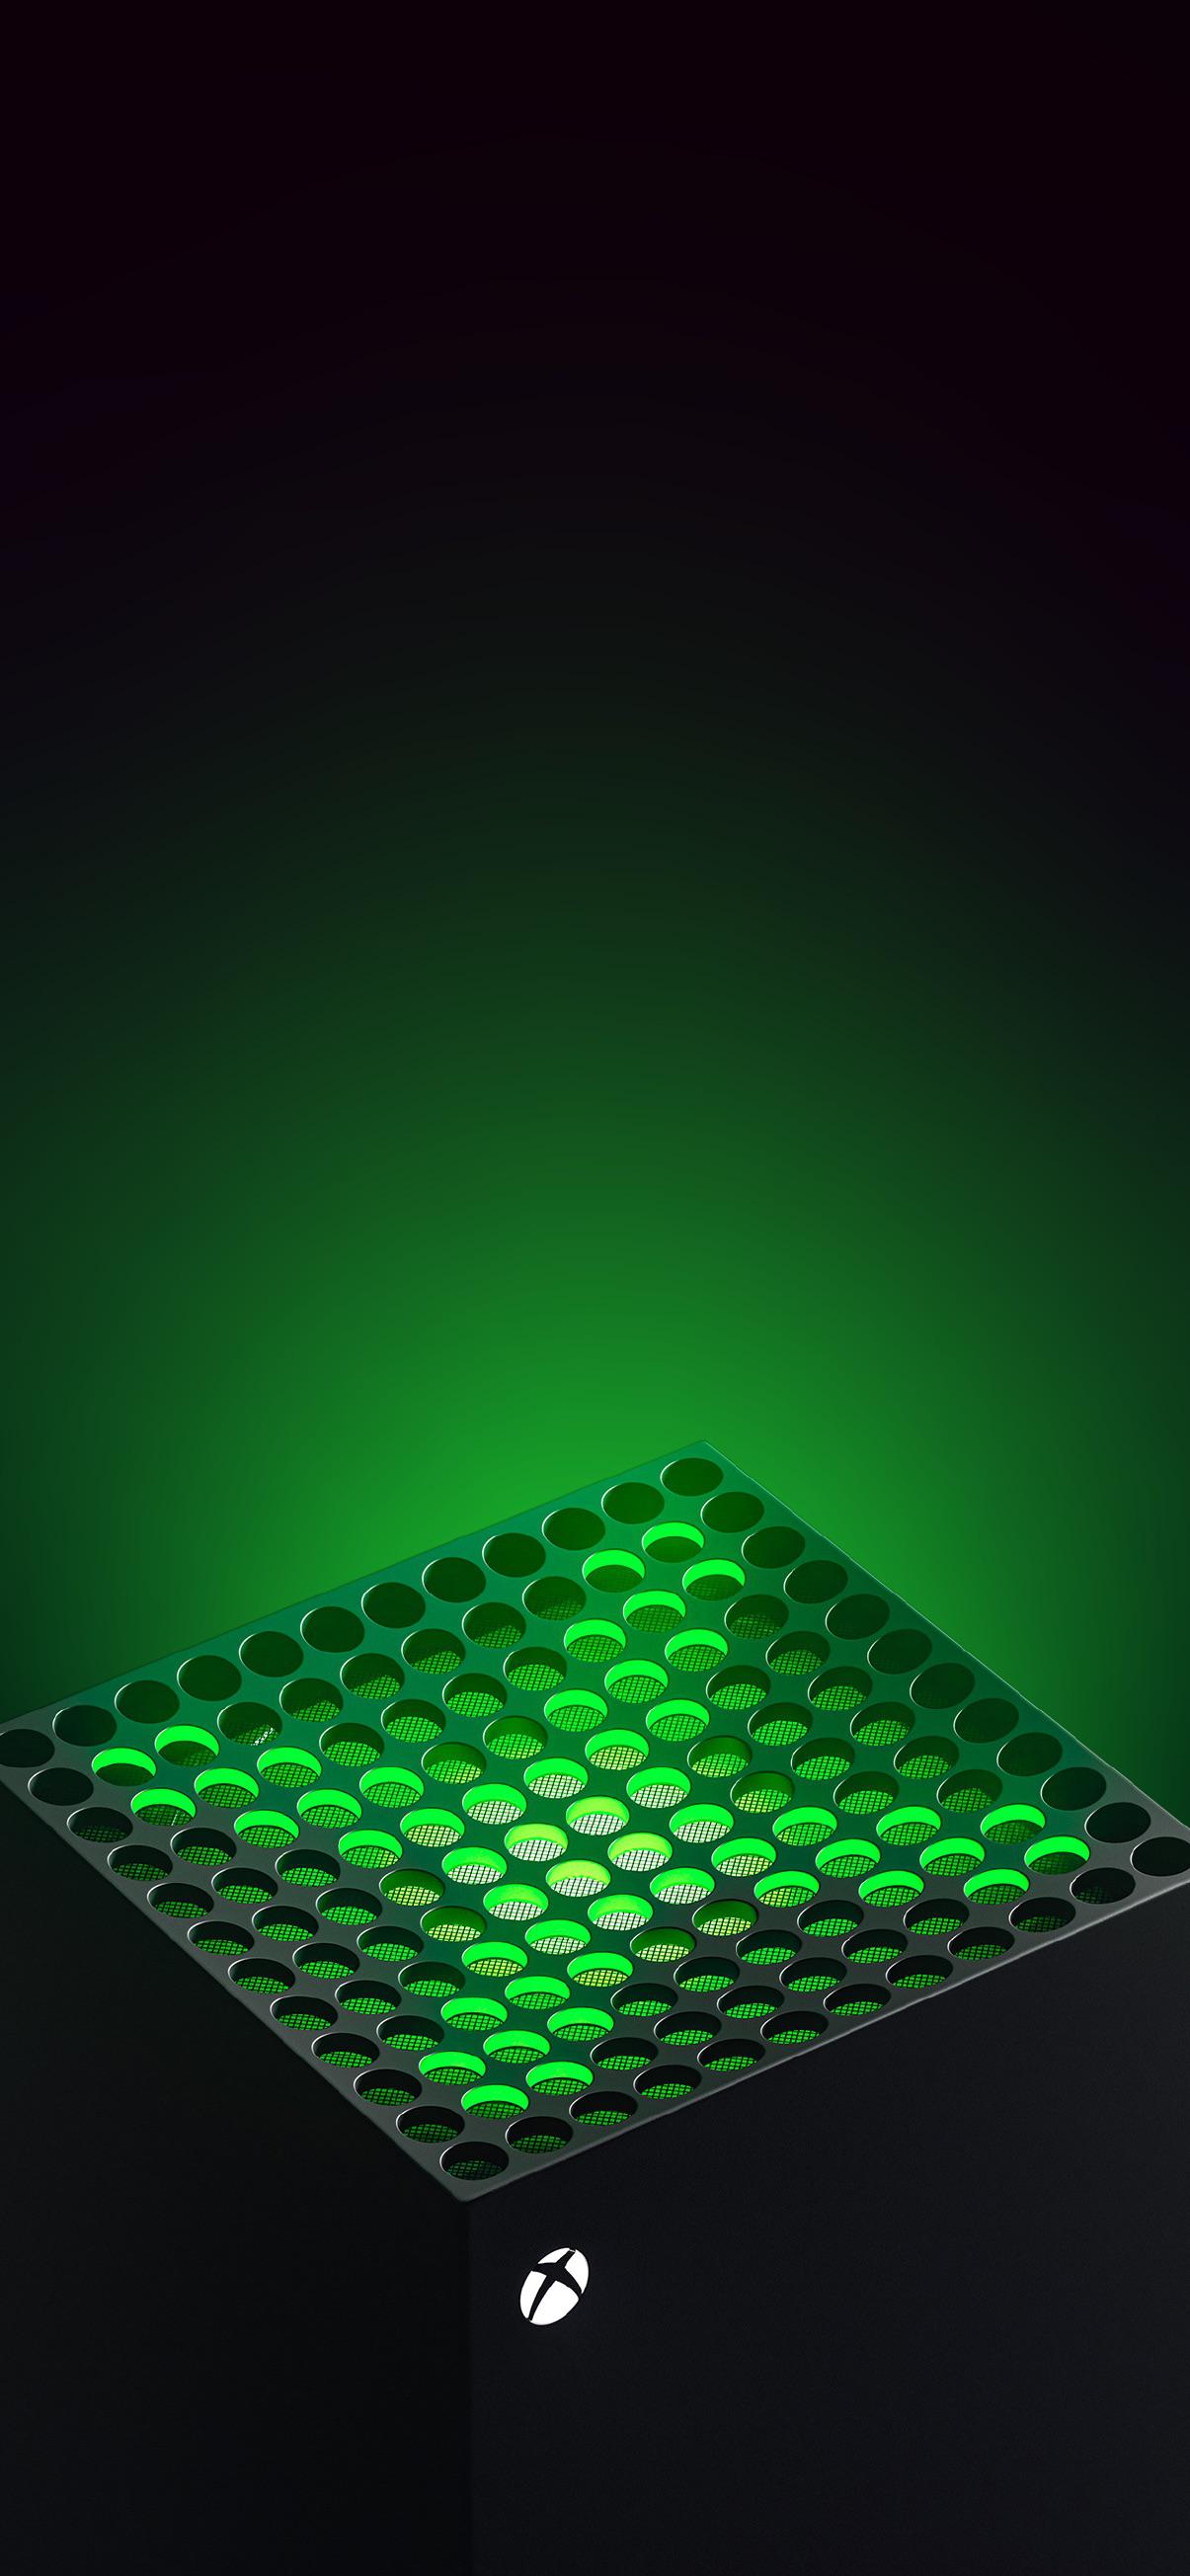 Heres a kickass wallpaper for your phone if you like rxboxseriesx